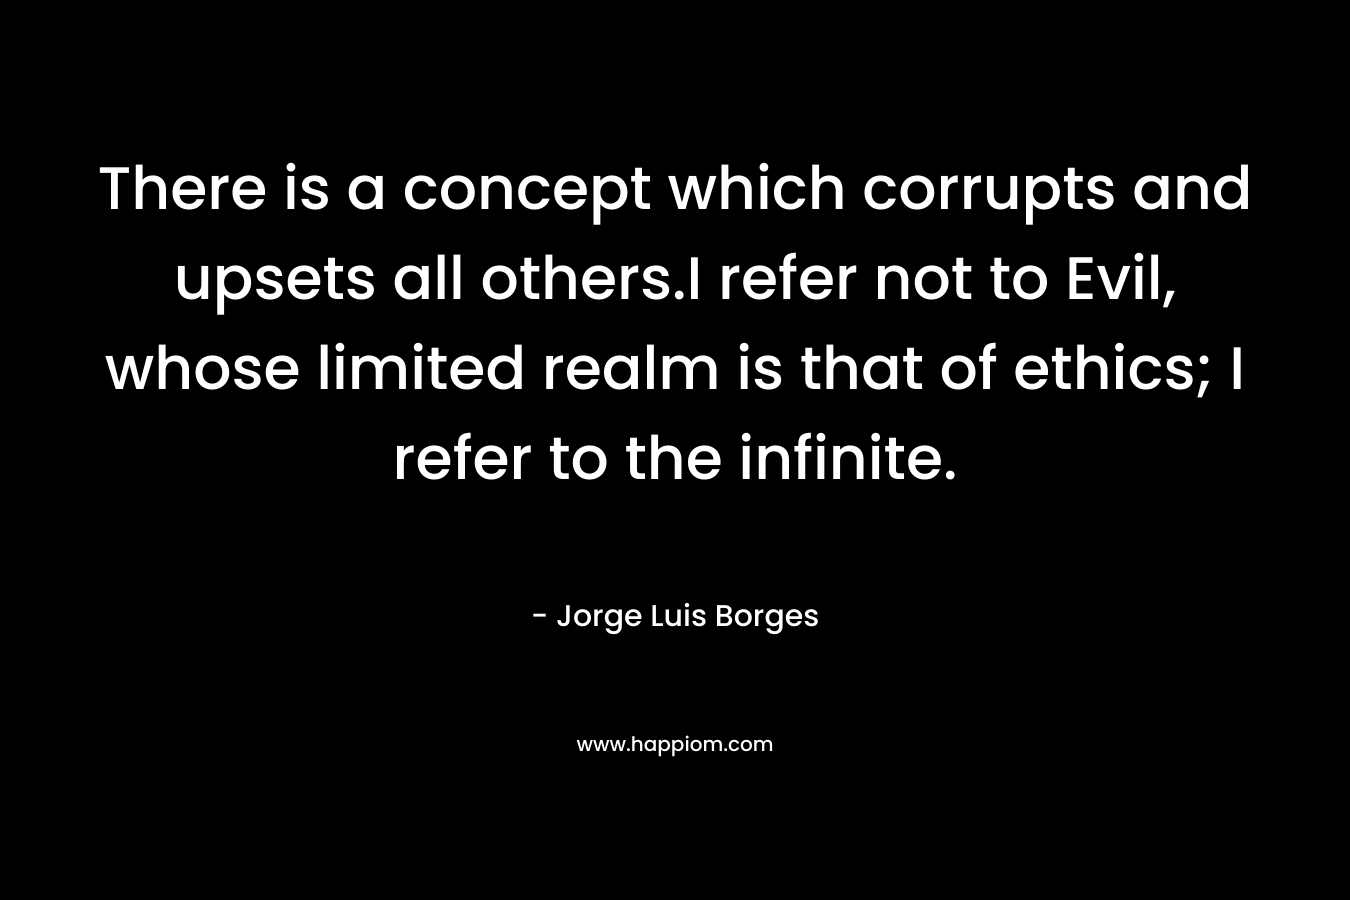 There is a concept which corrupts and upsets all others.I refer not to Evil, whose limited realm is that of ethics; I refer to the infinite. – Jorge Luis Borges